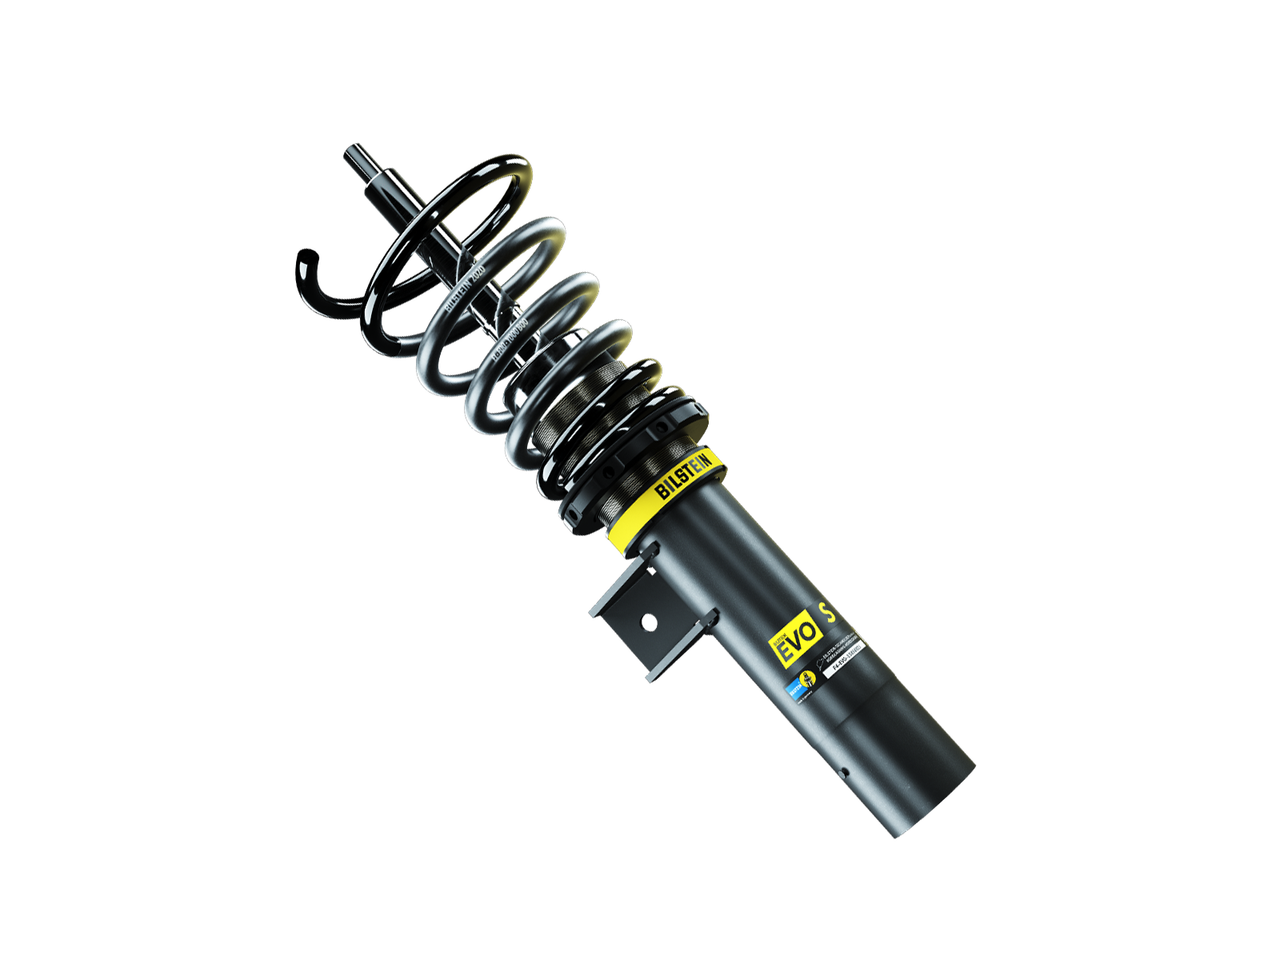 BILSTEIN EVO S: Probably the best suspension ever for the VW Caddy